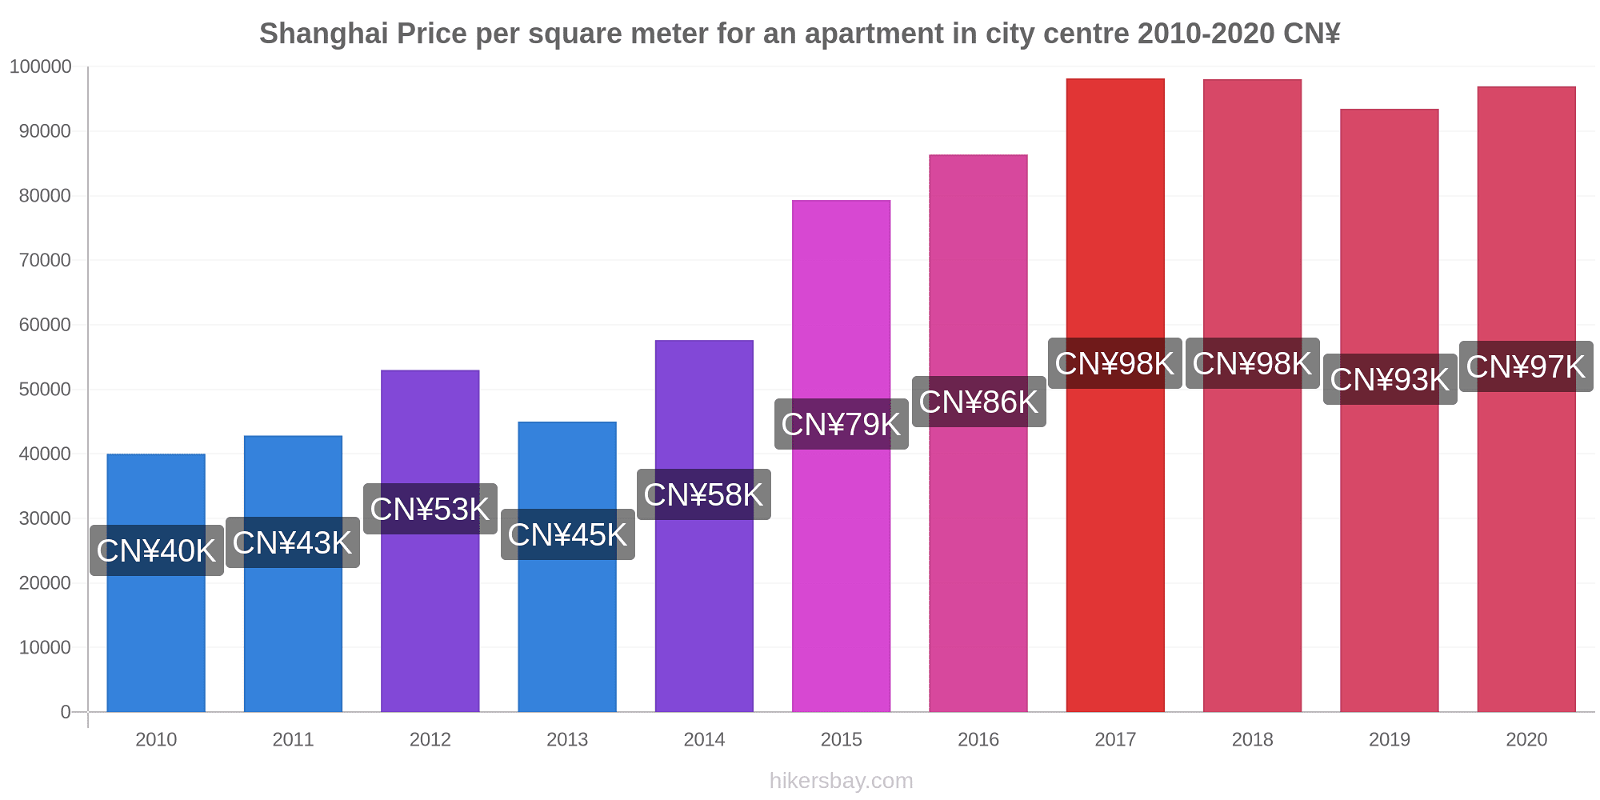 Shanghai price changes Price per square meter for an apartment in city centre hikersbay.com